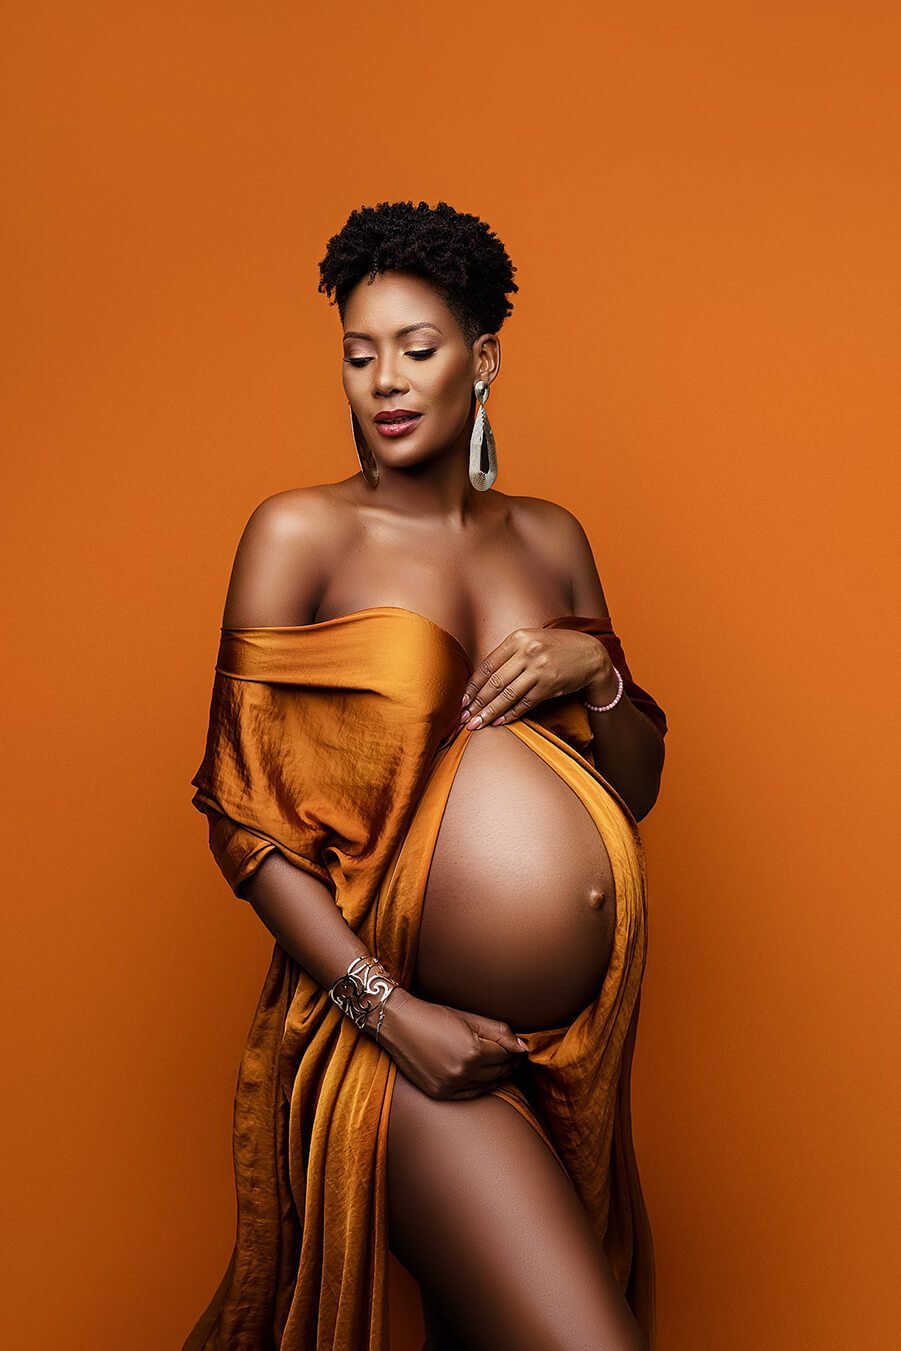 pregnant model poses with a cognac silky scarf wrapped around her arms. she is looking down and poses in front of an orange background with a cognac scarf.